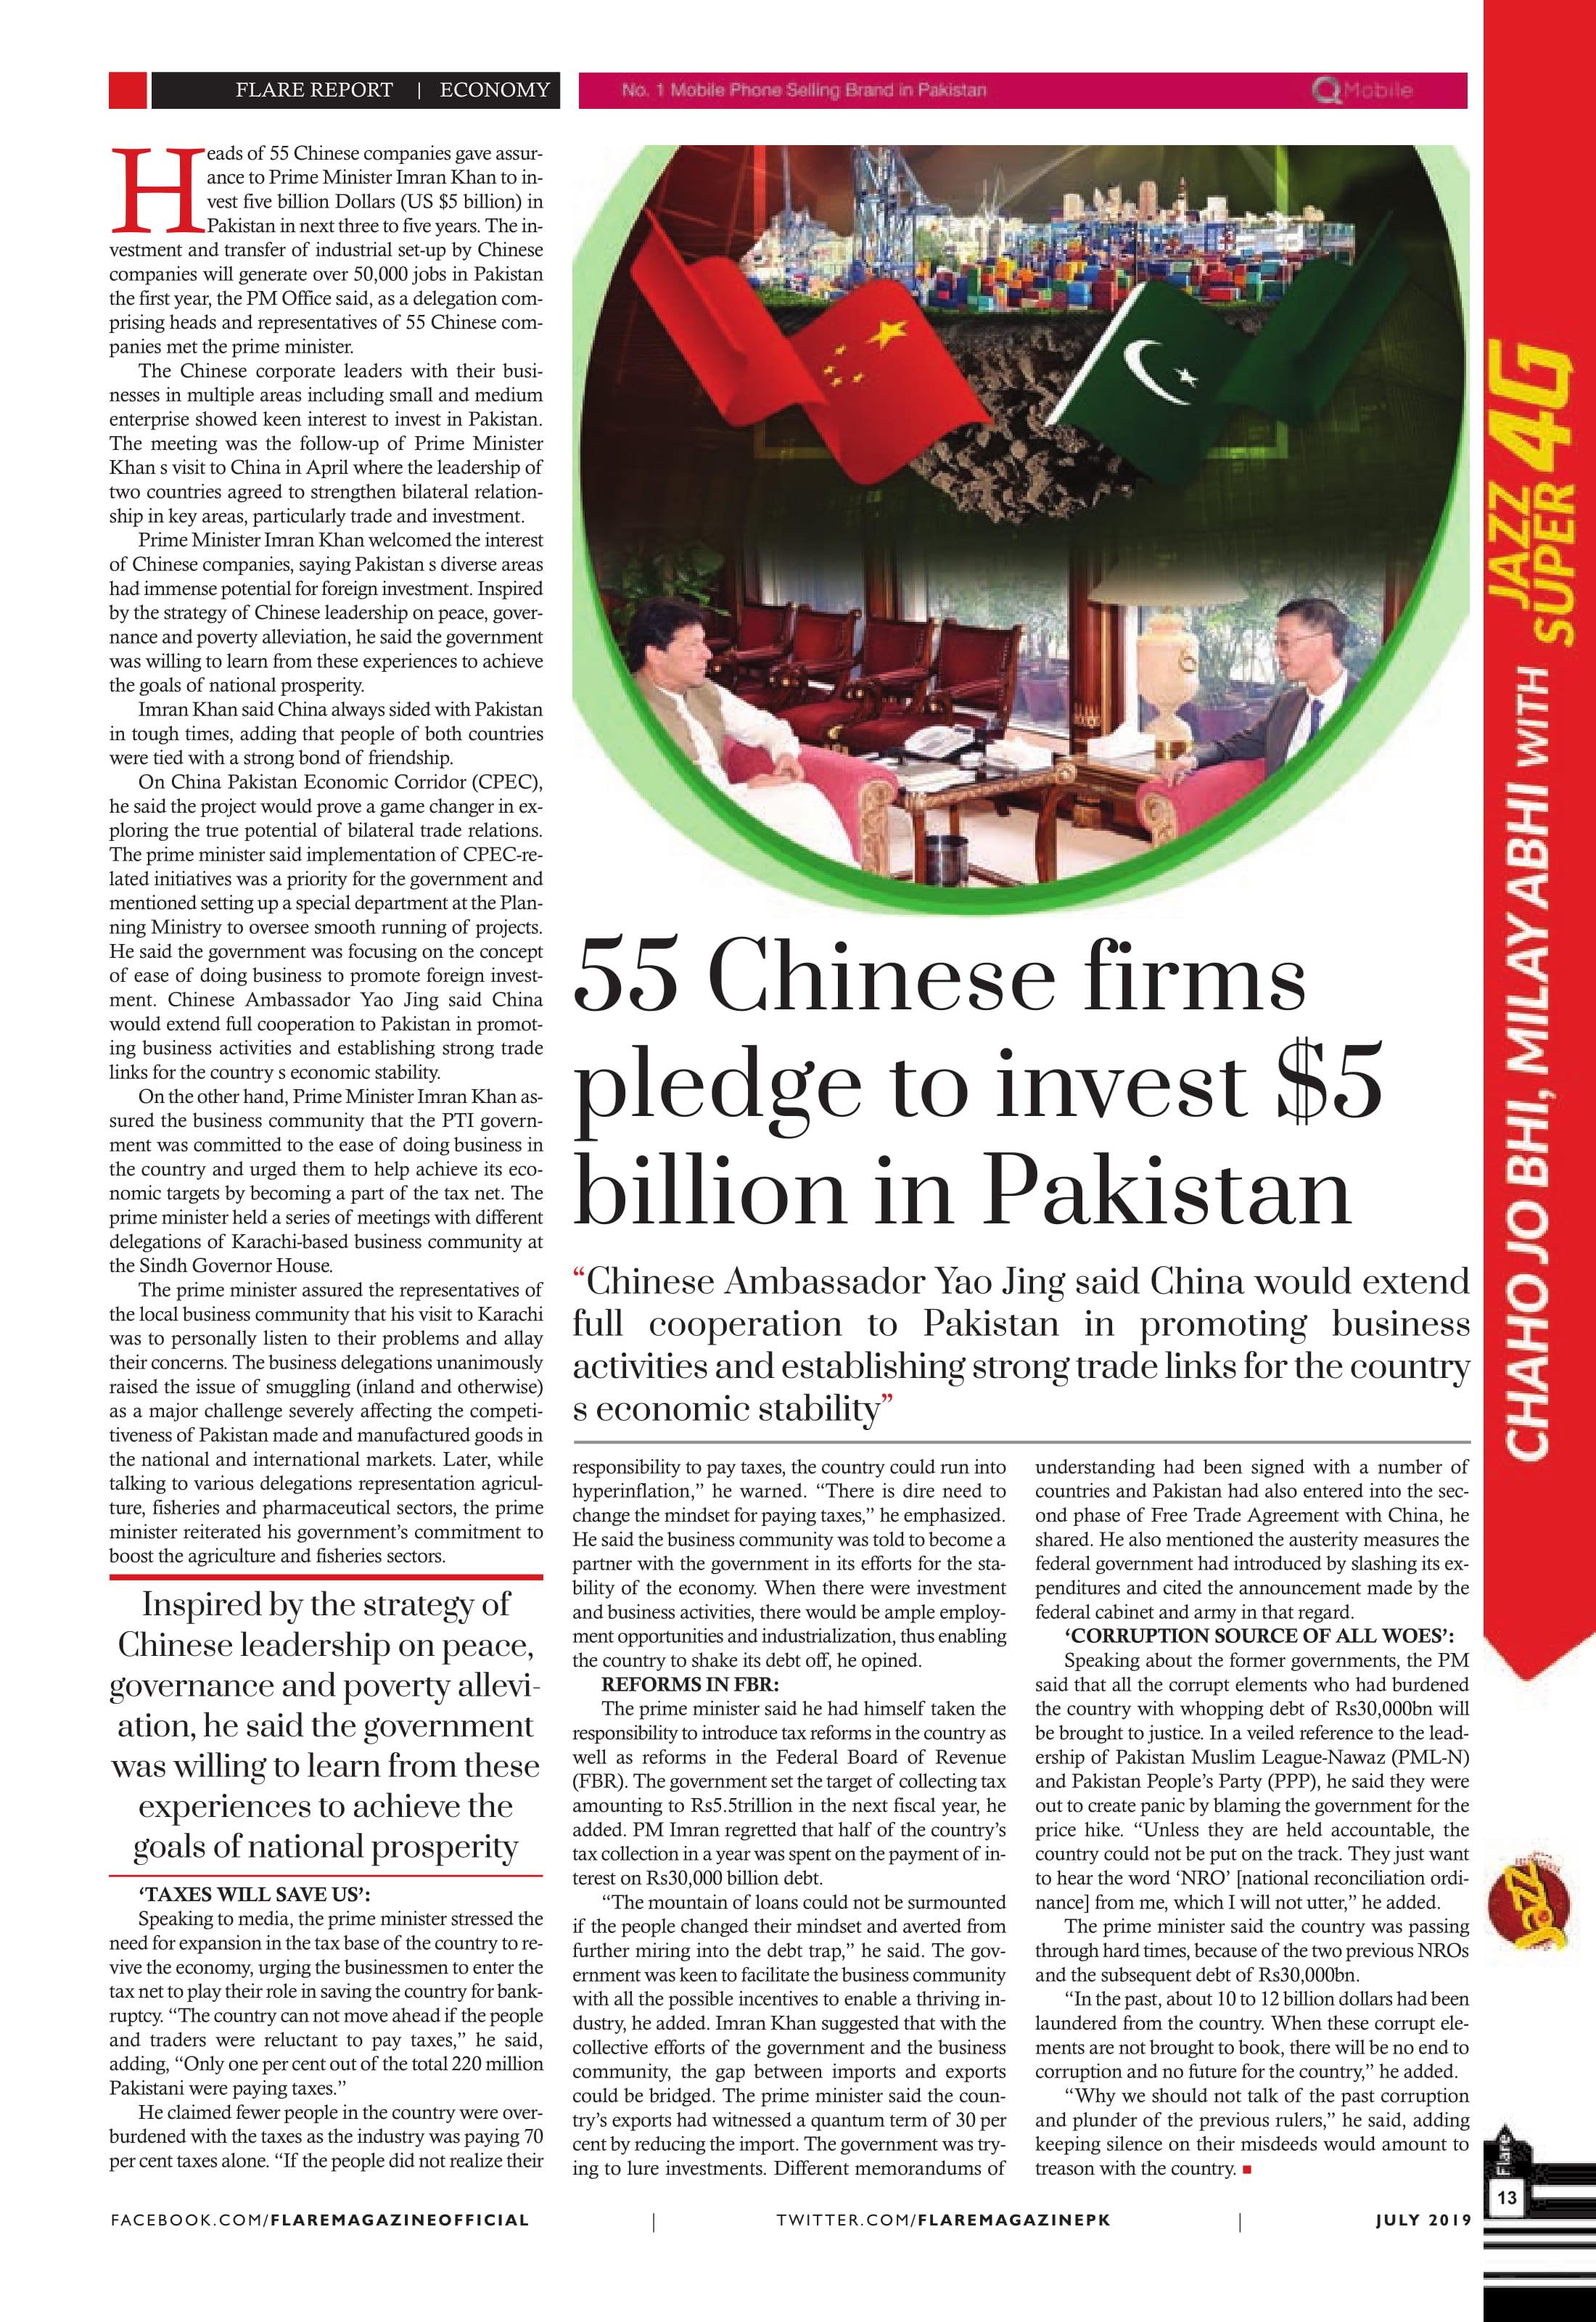 55 Chinese firms pledge to invest $5 billion in Pakistan